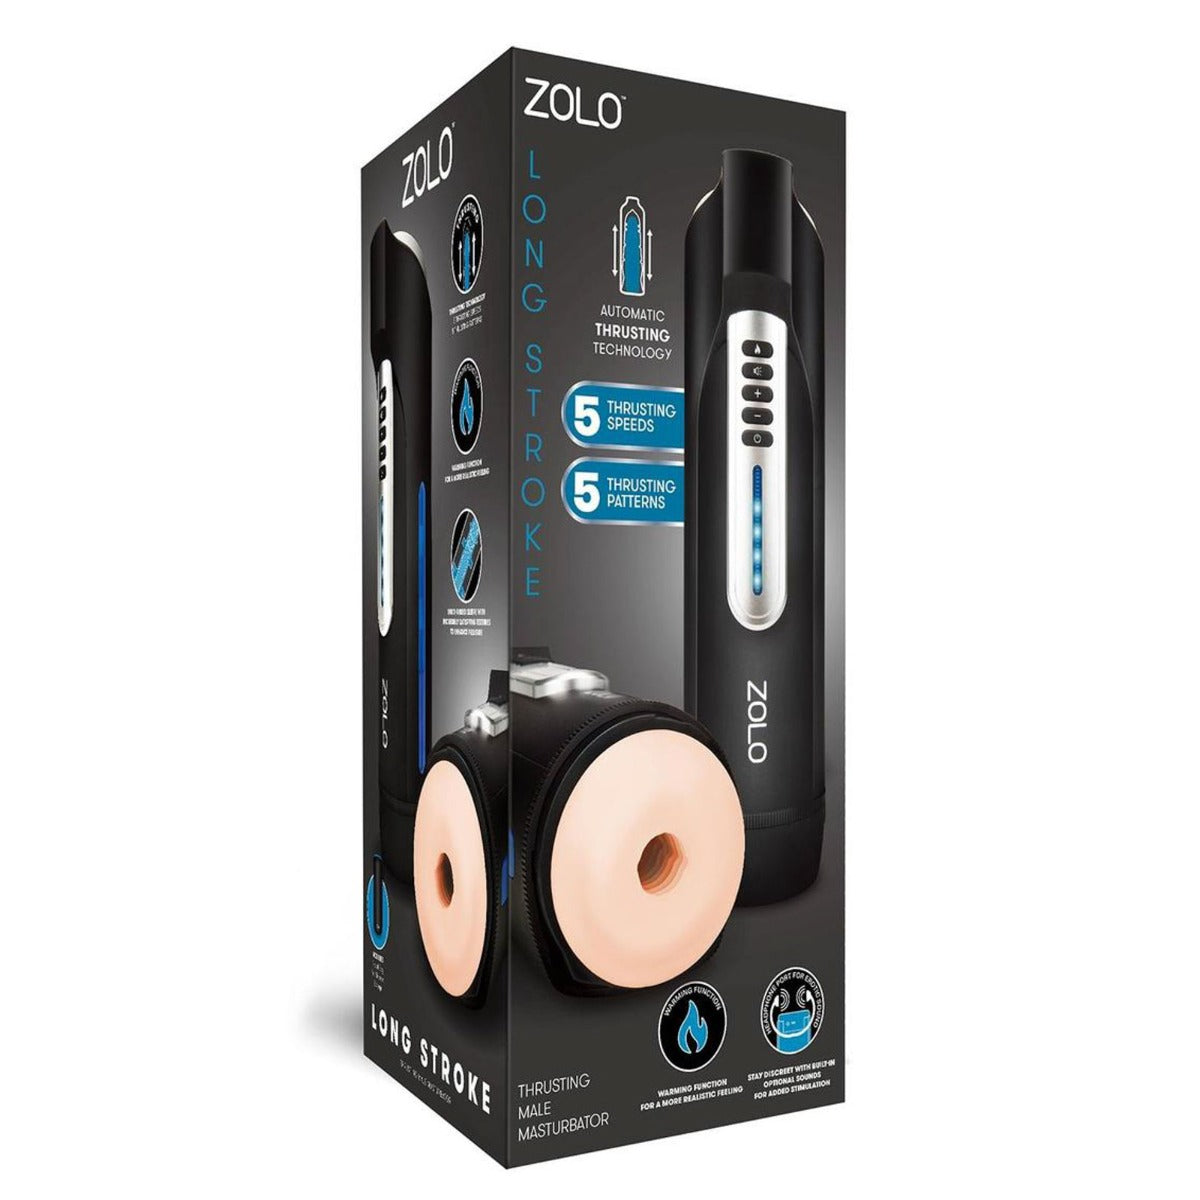 Zolo Long Stroke - Long Automatic Masturbator with Warming, Thrusting, and 10 Pleasure Functions